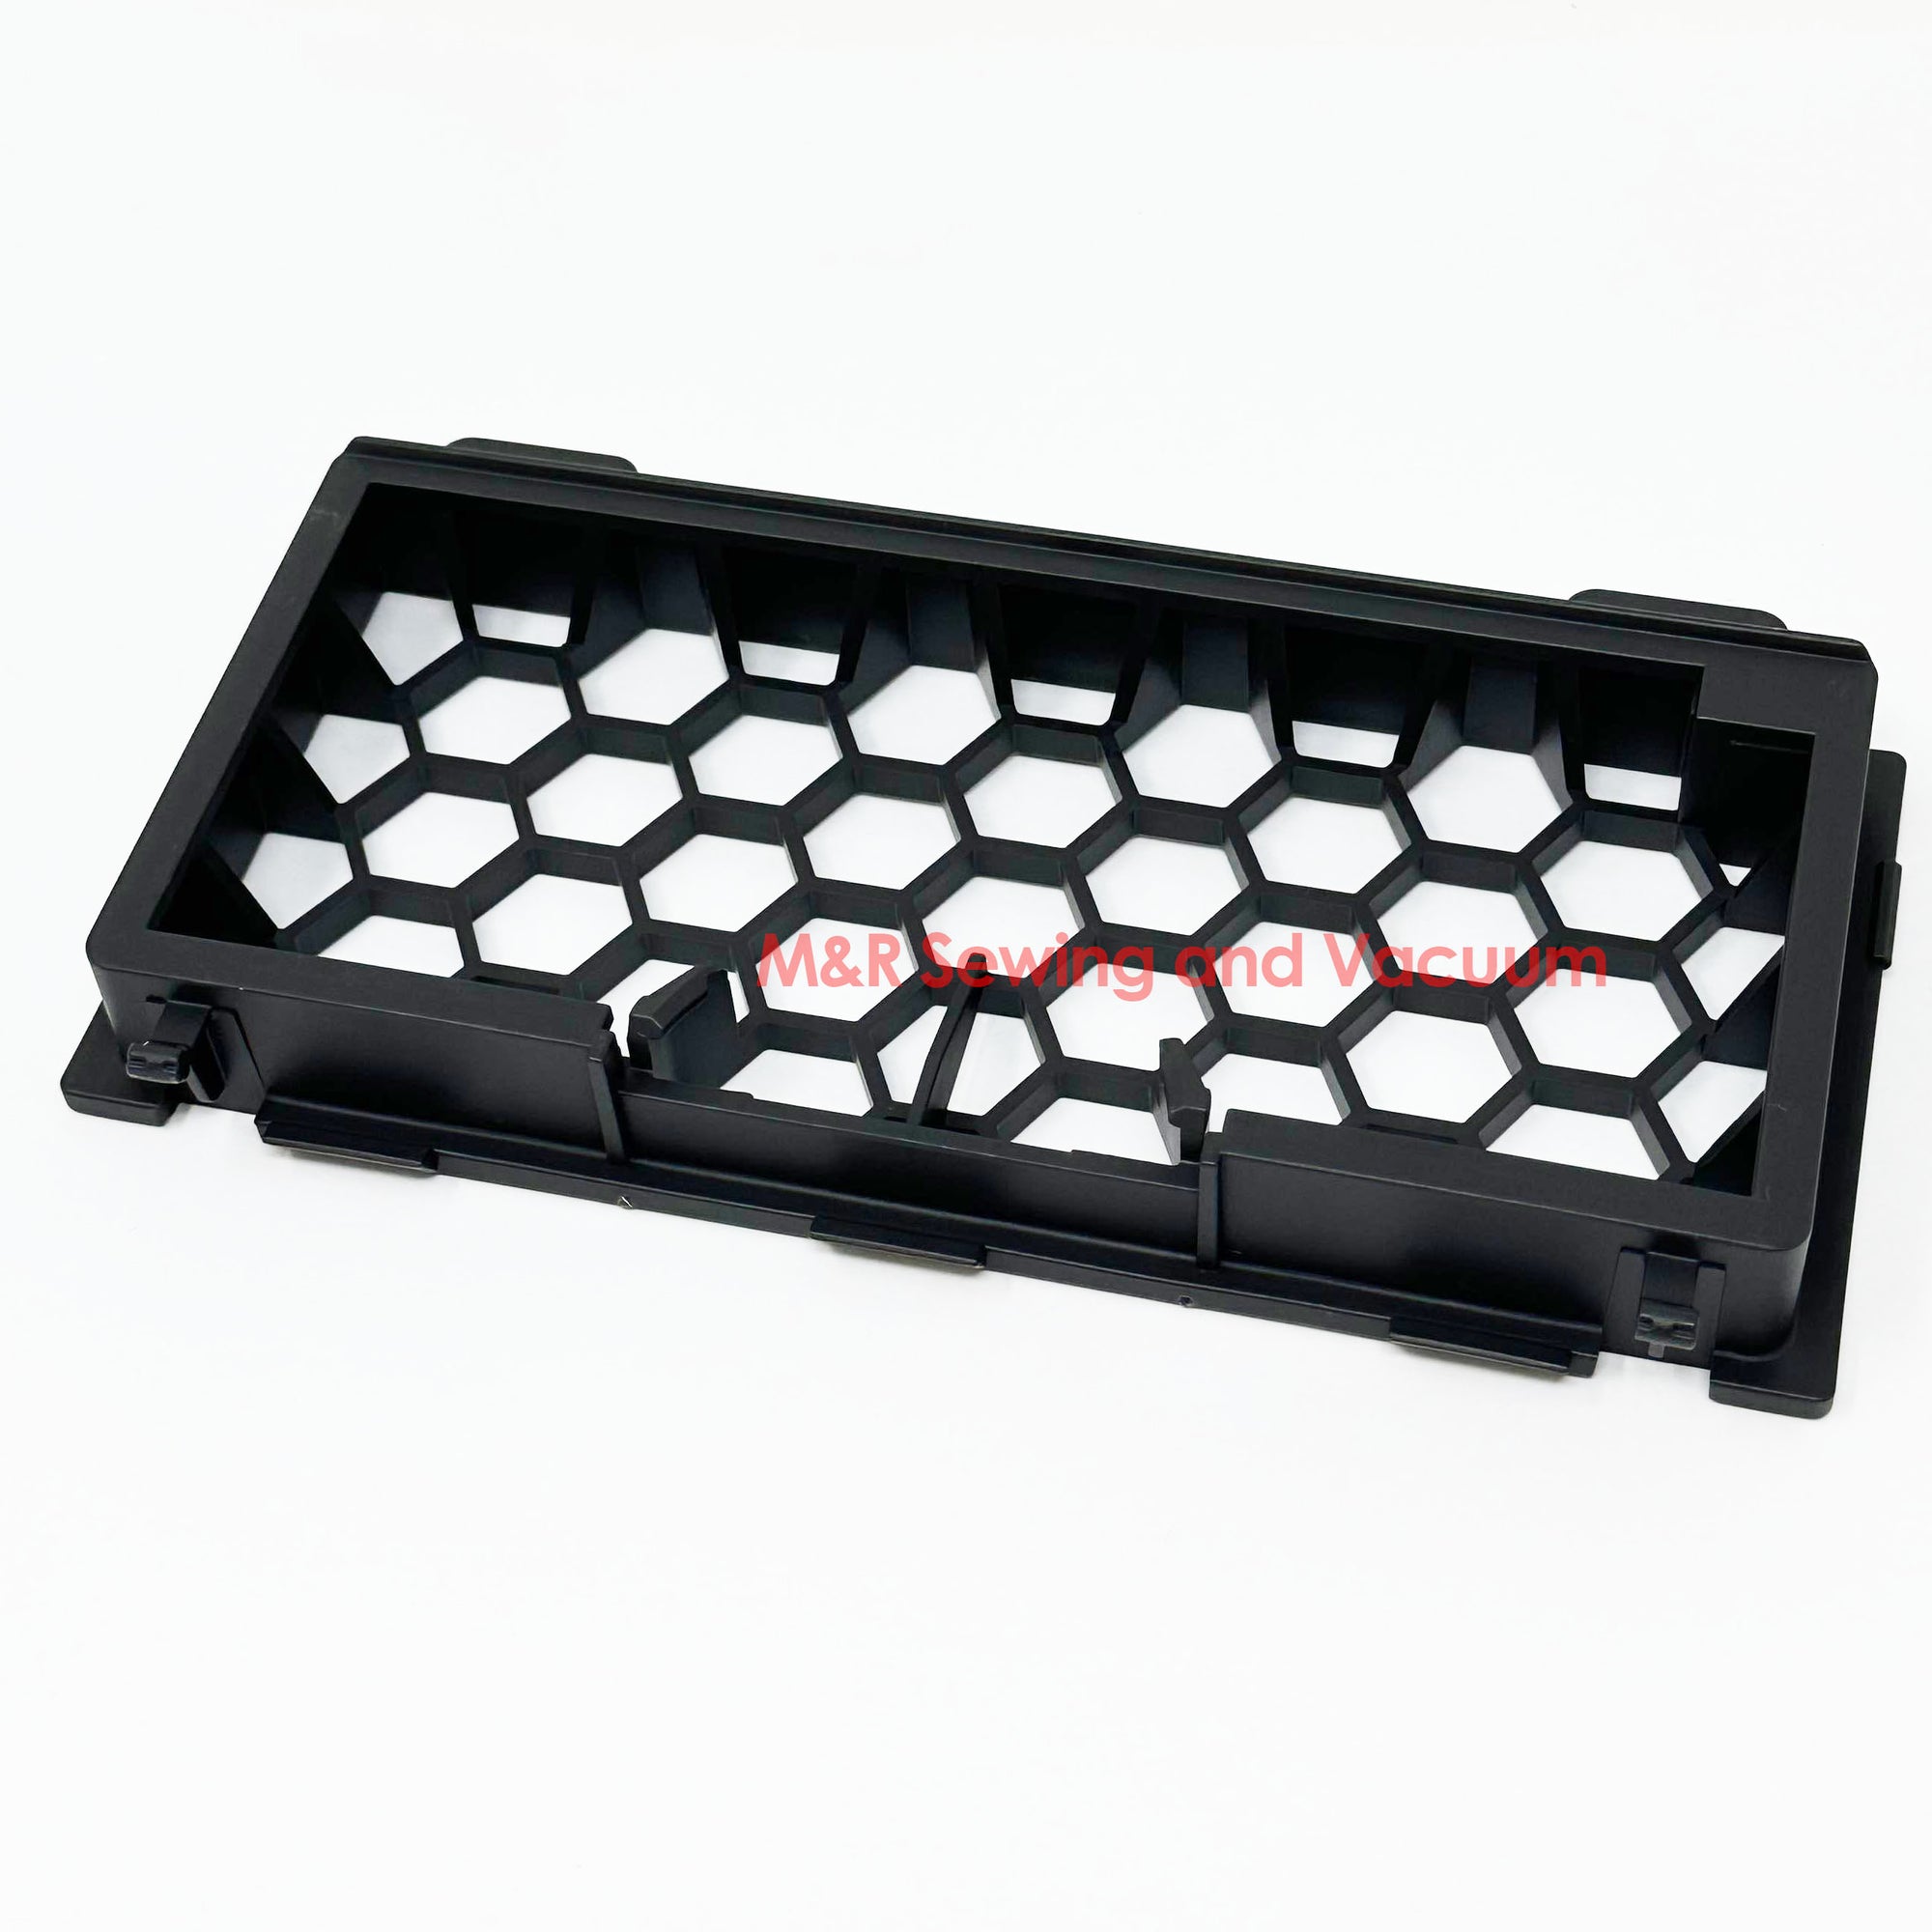 Grille for Super AirClean Filter